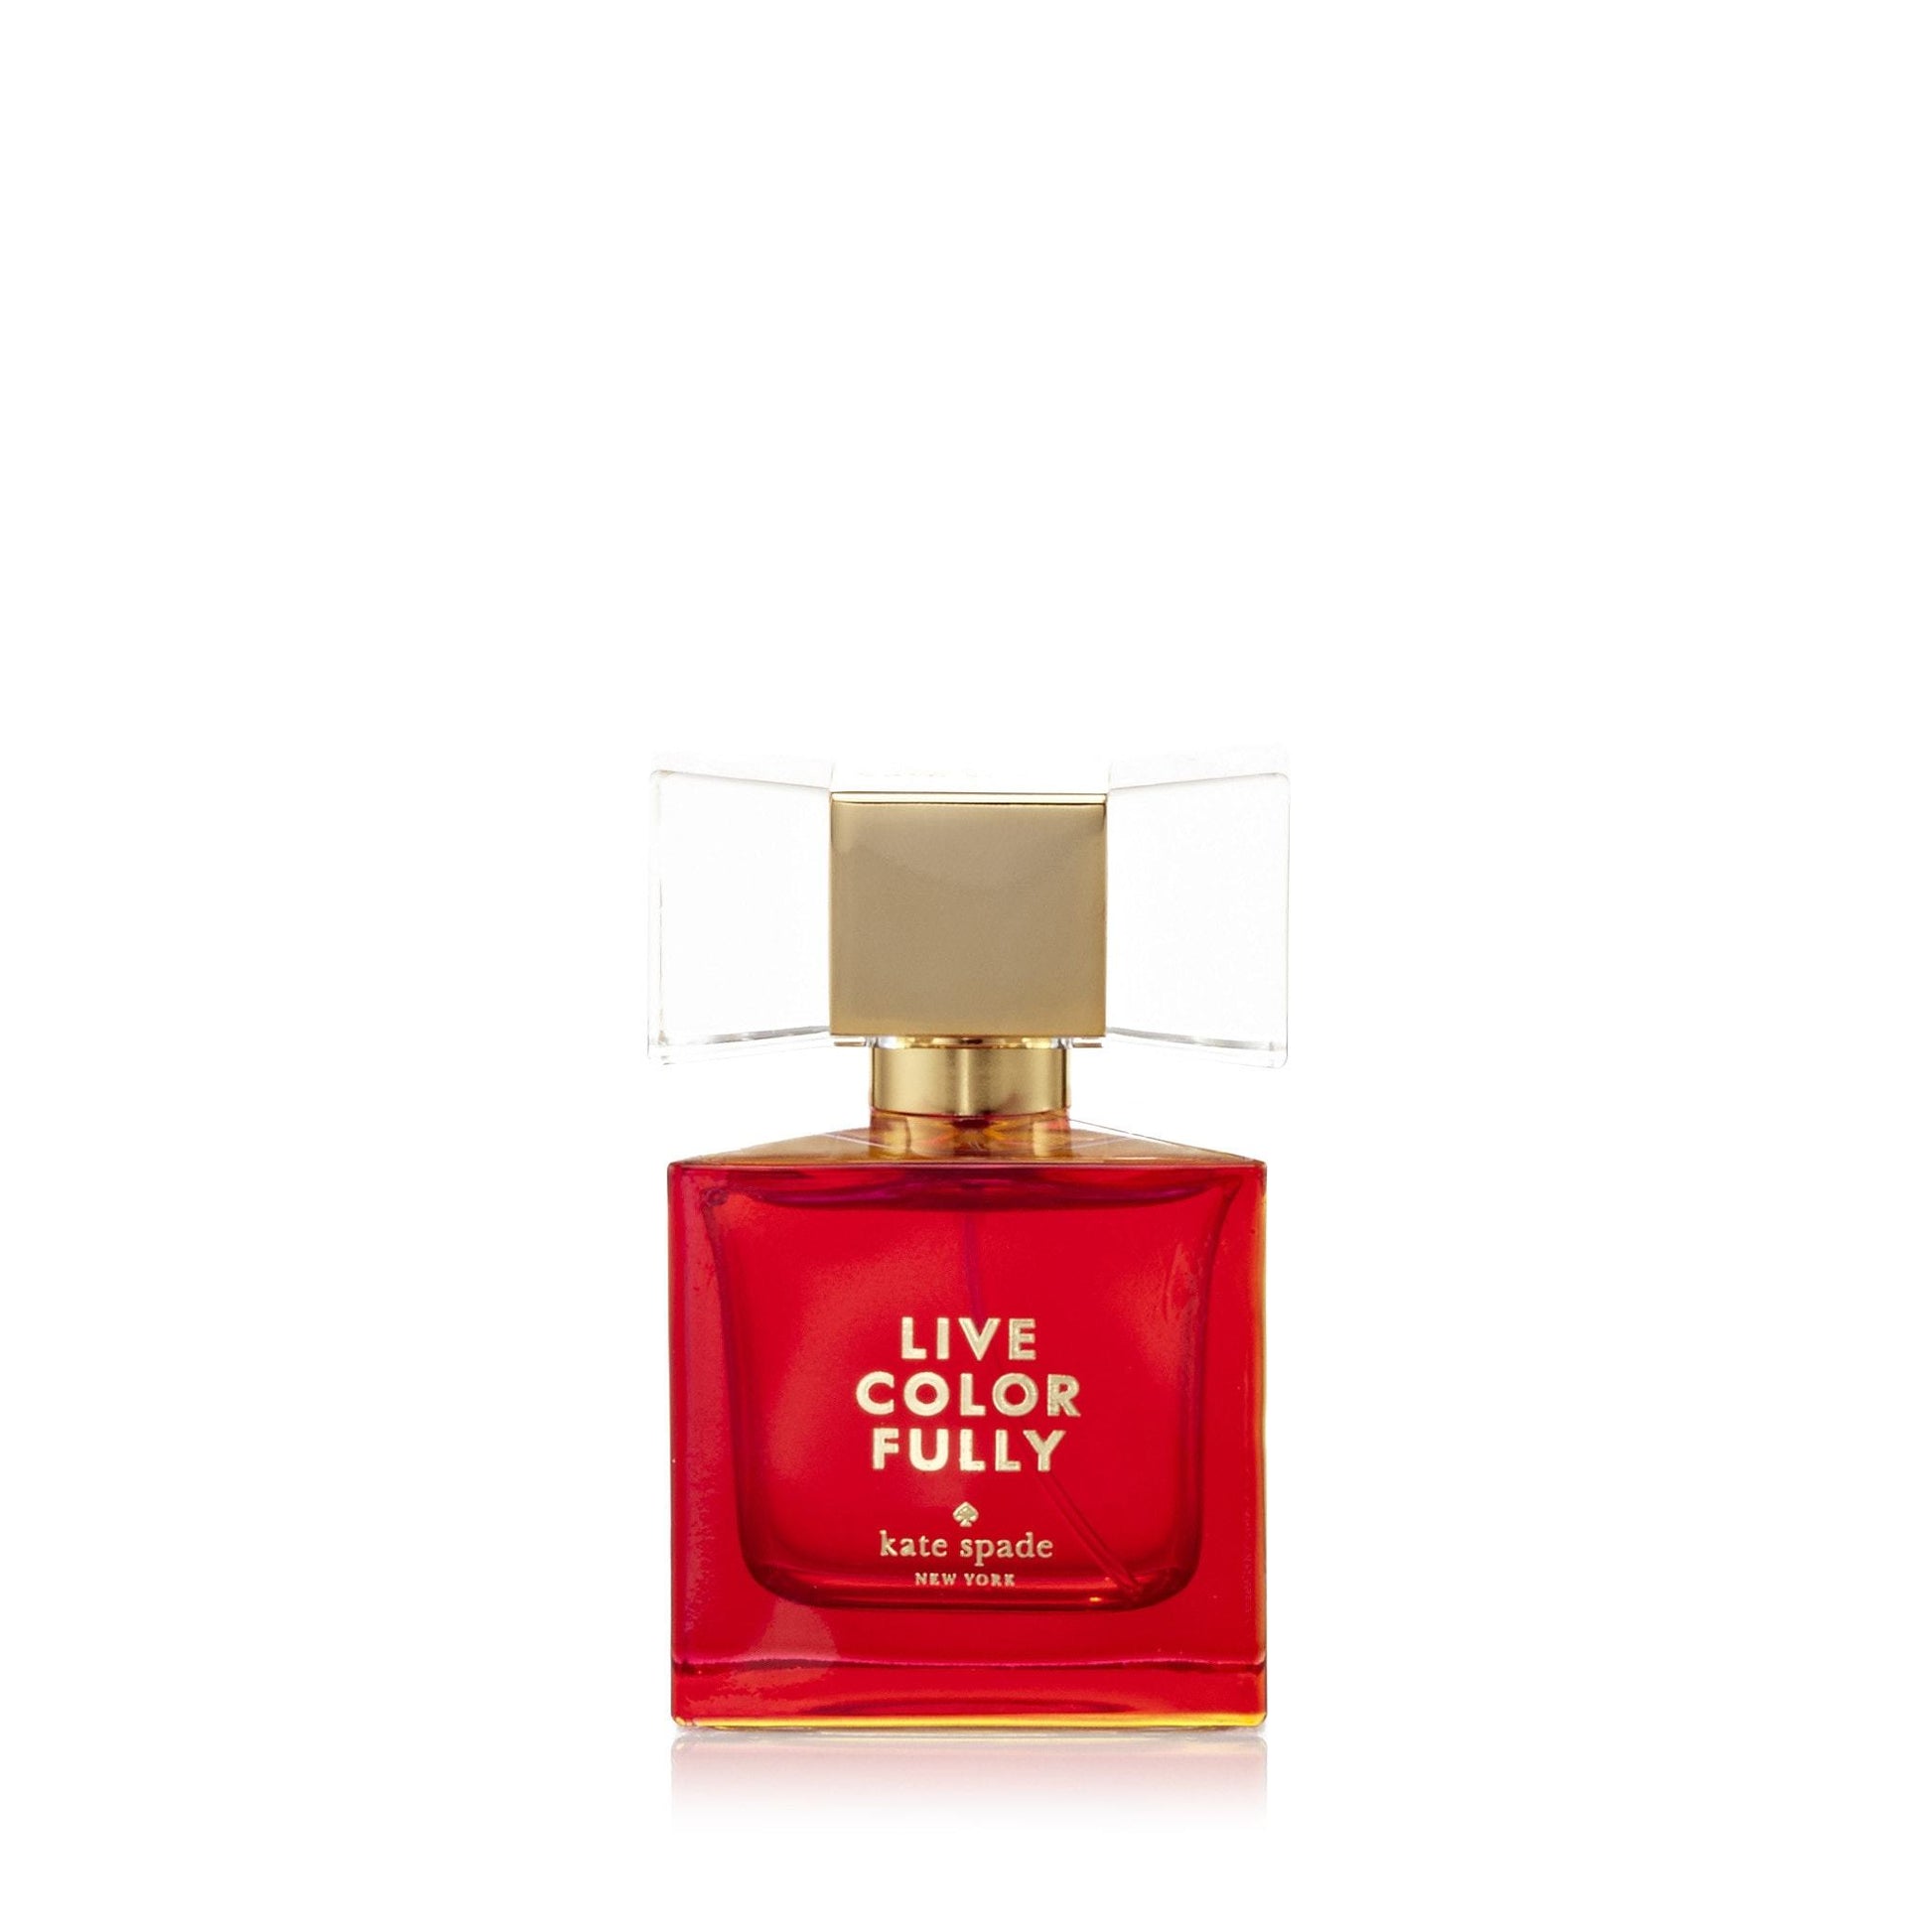 N.Y. Live Colorfully Eau de Parfum Spray for Women by Kate Spade, Product image 3